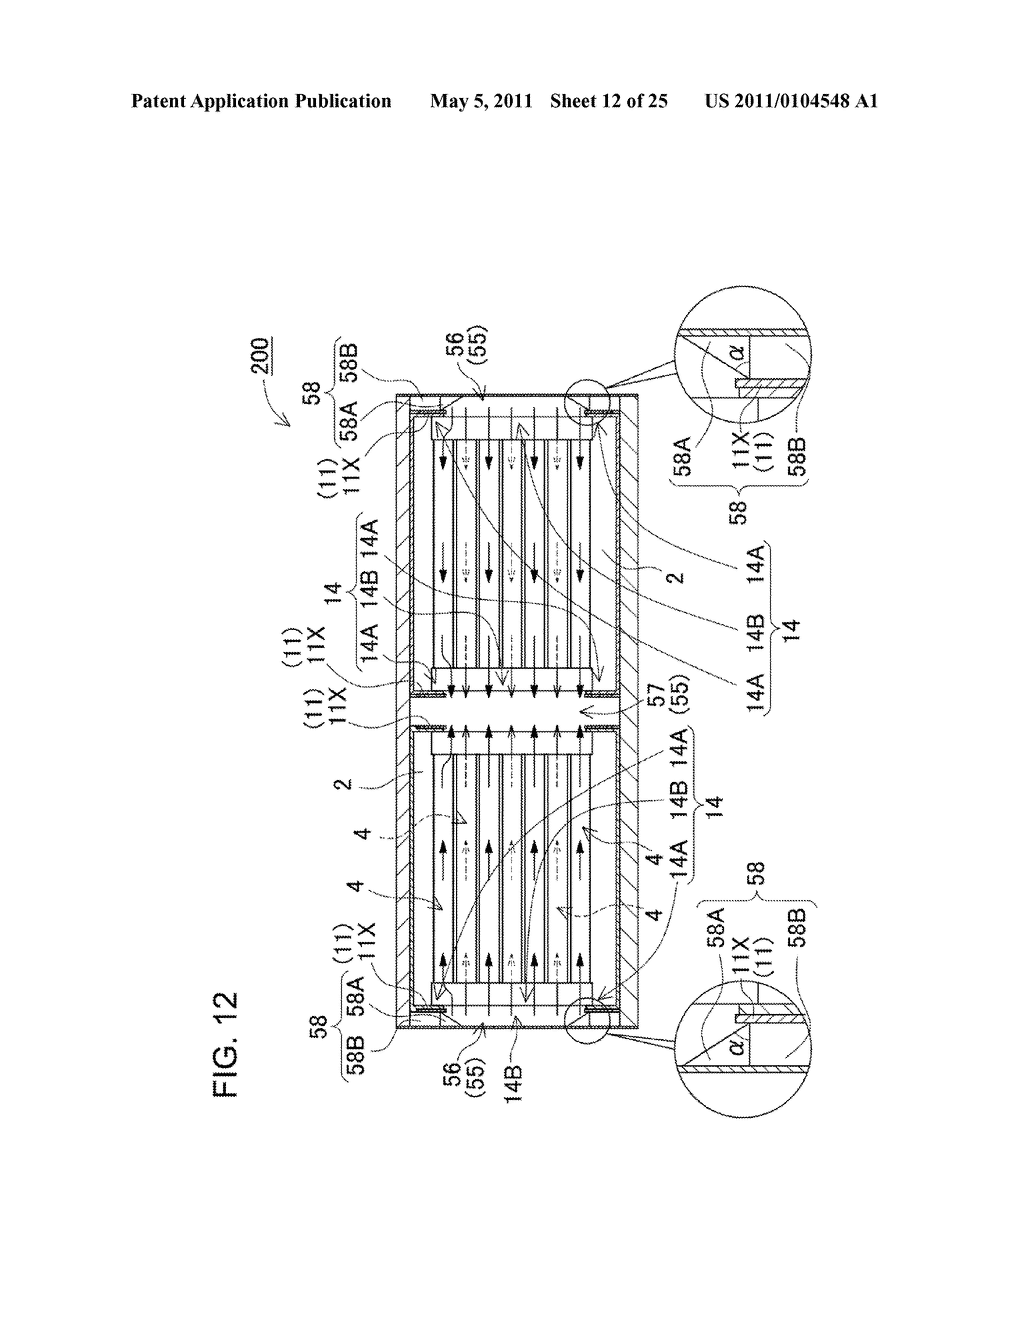 POWER SUPPLY DEVICE INCLUDING A PLURALITY OF BATTERY CELLS ARRANGED SIDE BY SIDE - diagram, schematic, and image 13